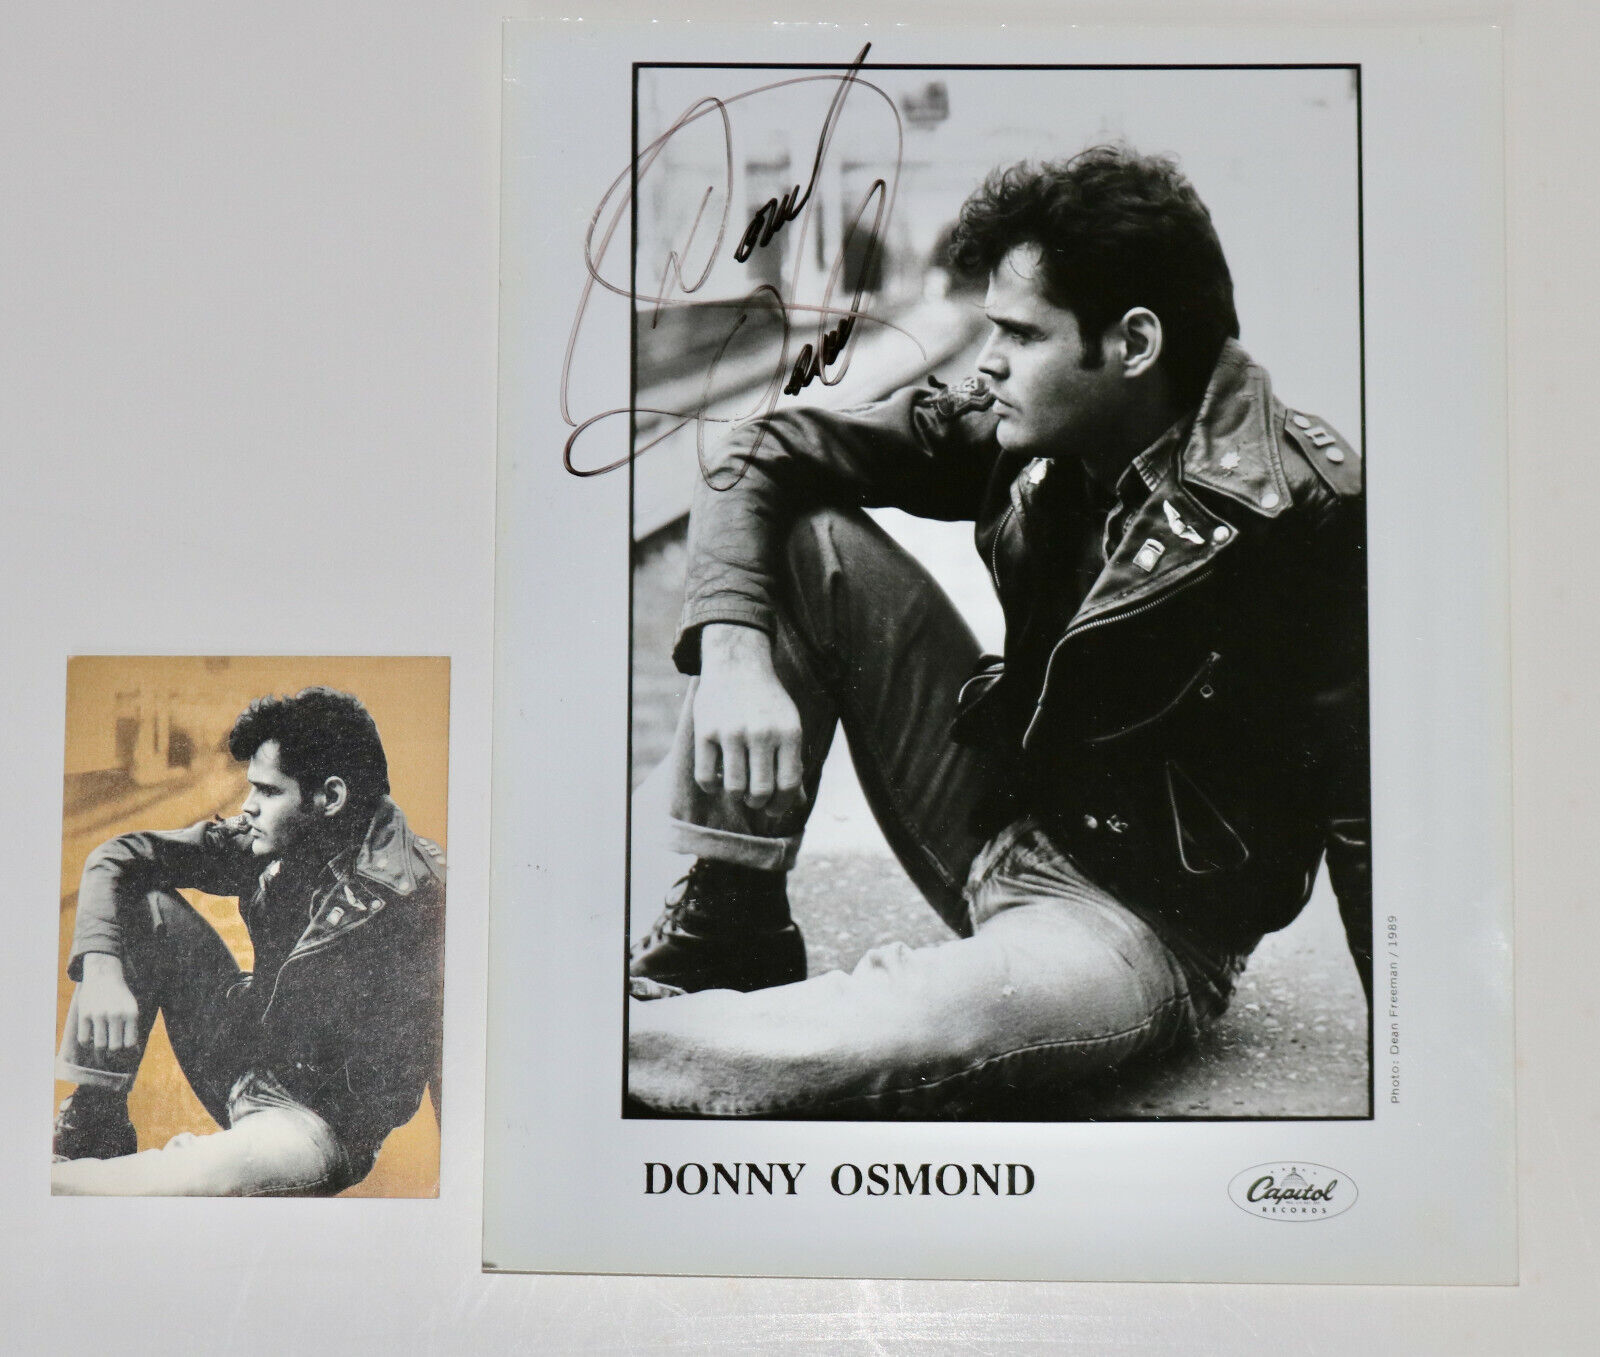 Donny Osmond signed press photo 1989 and party invite for Capitol album